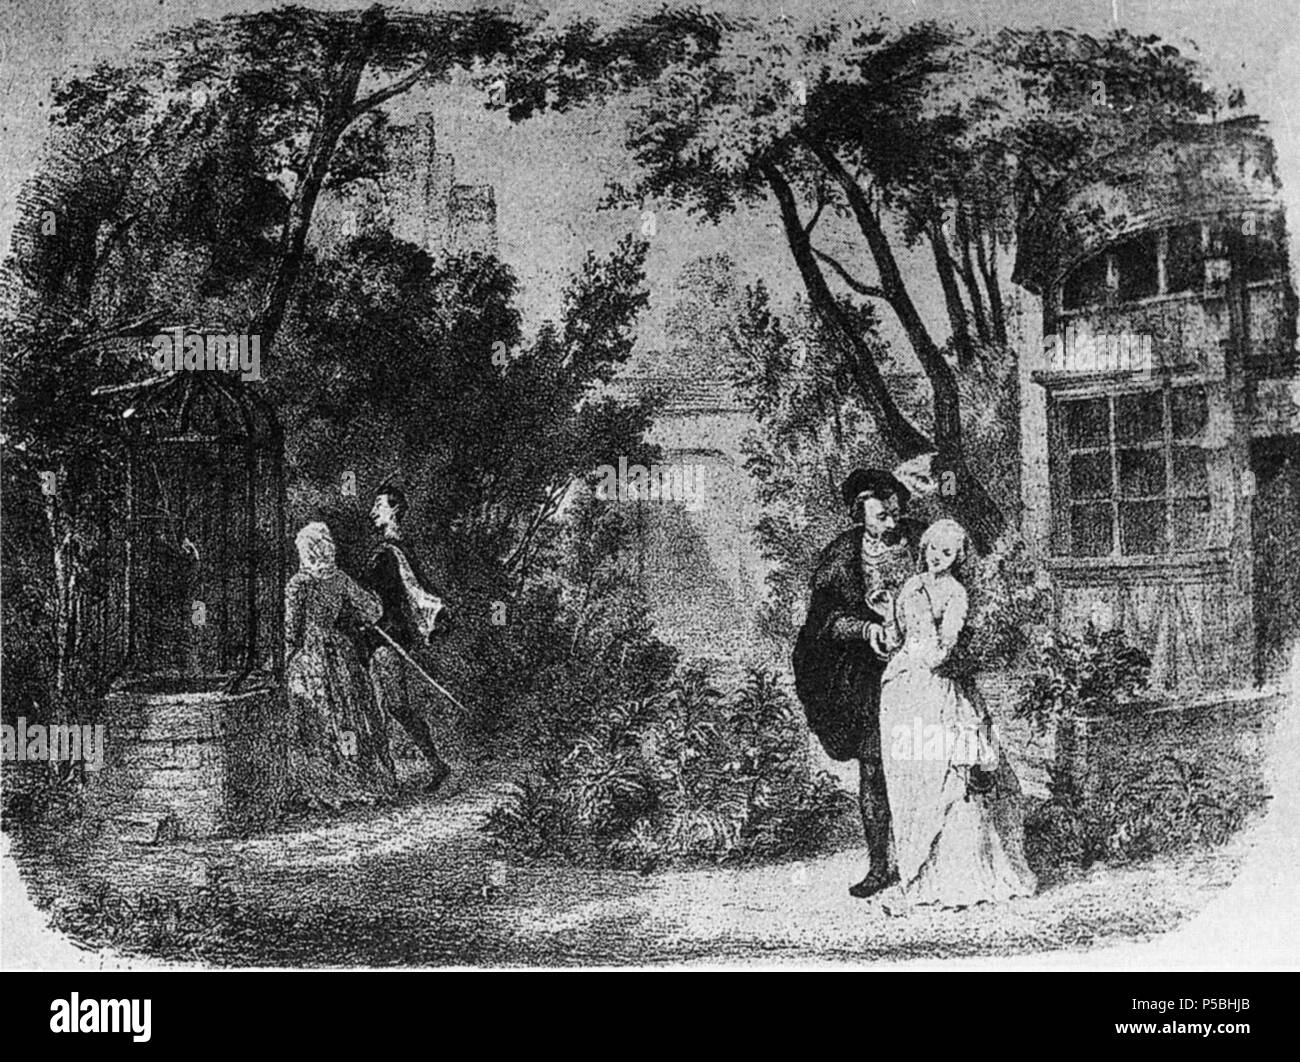 N/A. English: Margeurite's garden in Act 3 of the opera Faust by Gounod as presented in the original production at the Théâtre Lyrique on 19 March 1859. circa 1859. Pierre-Auguste Lamy (1827–1880), lithographer; Charles-Antoine Cambon (1802–1875) and Joseph Thierry (1811–1866), set designers 550 Faust by Gounod Act3 1859 engraving by Lamy NGO2p134 Stock Photo